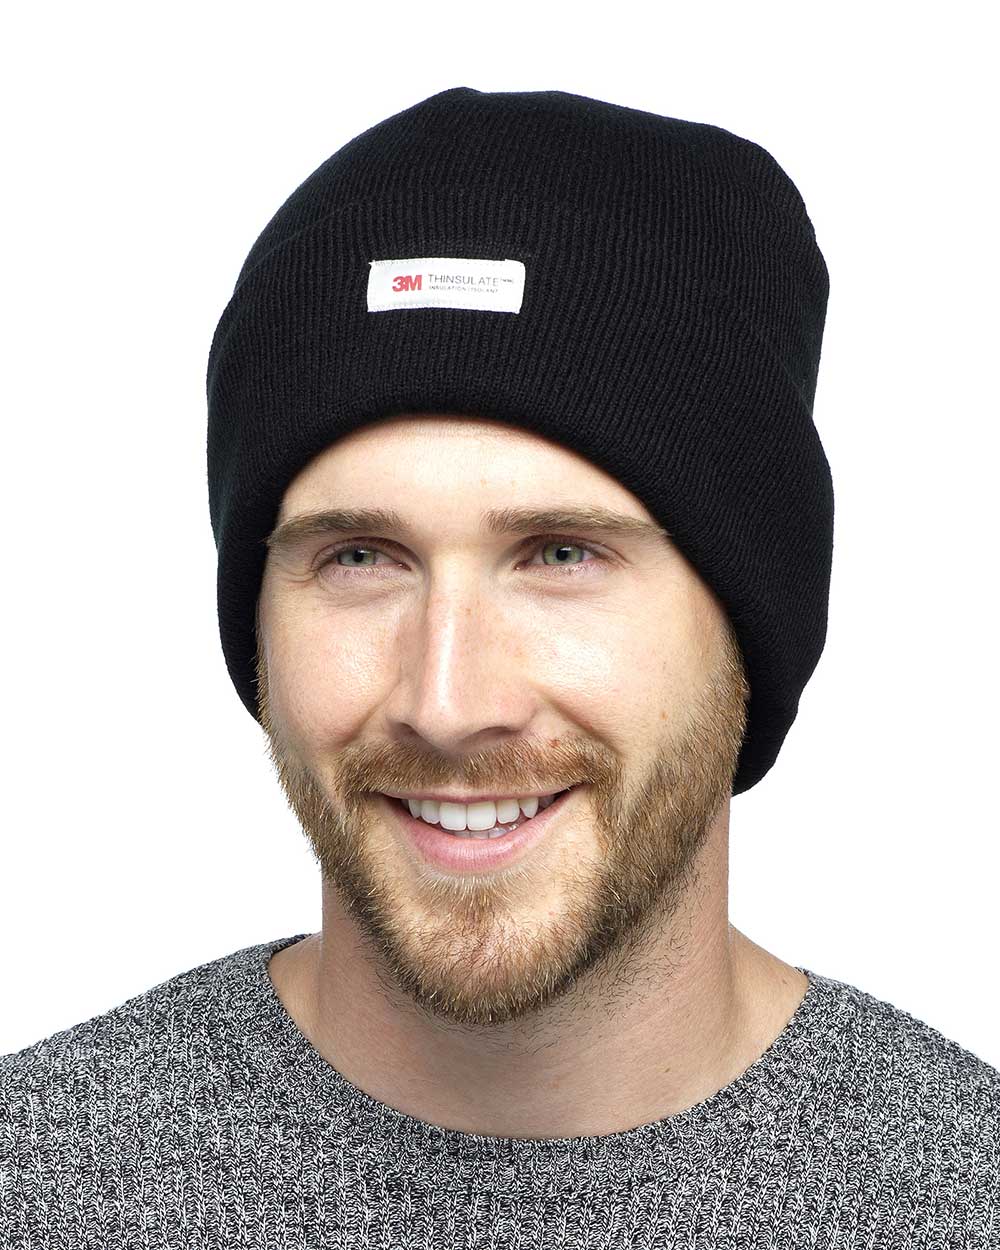 Men's Thermal Hat Black Thinsulate 3M Knitted beanie one size